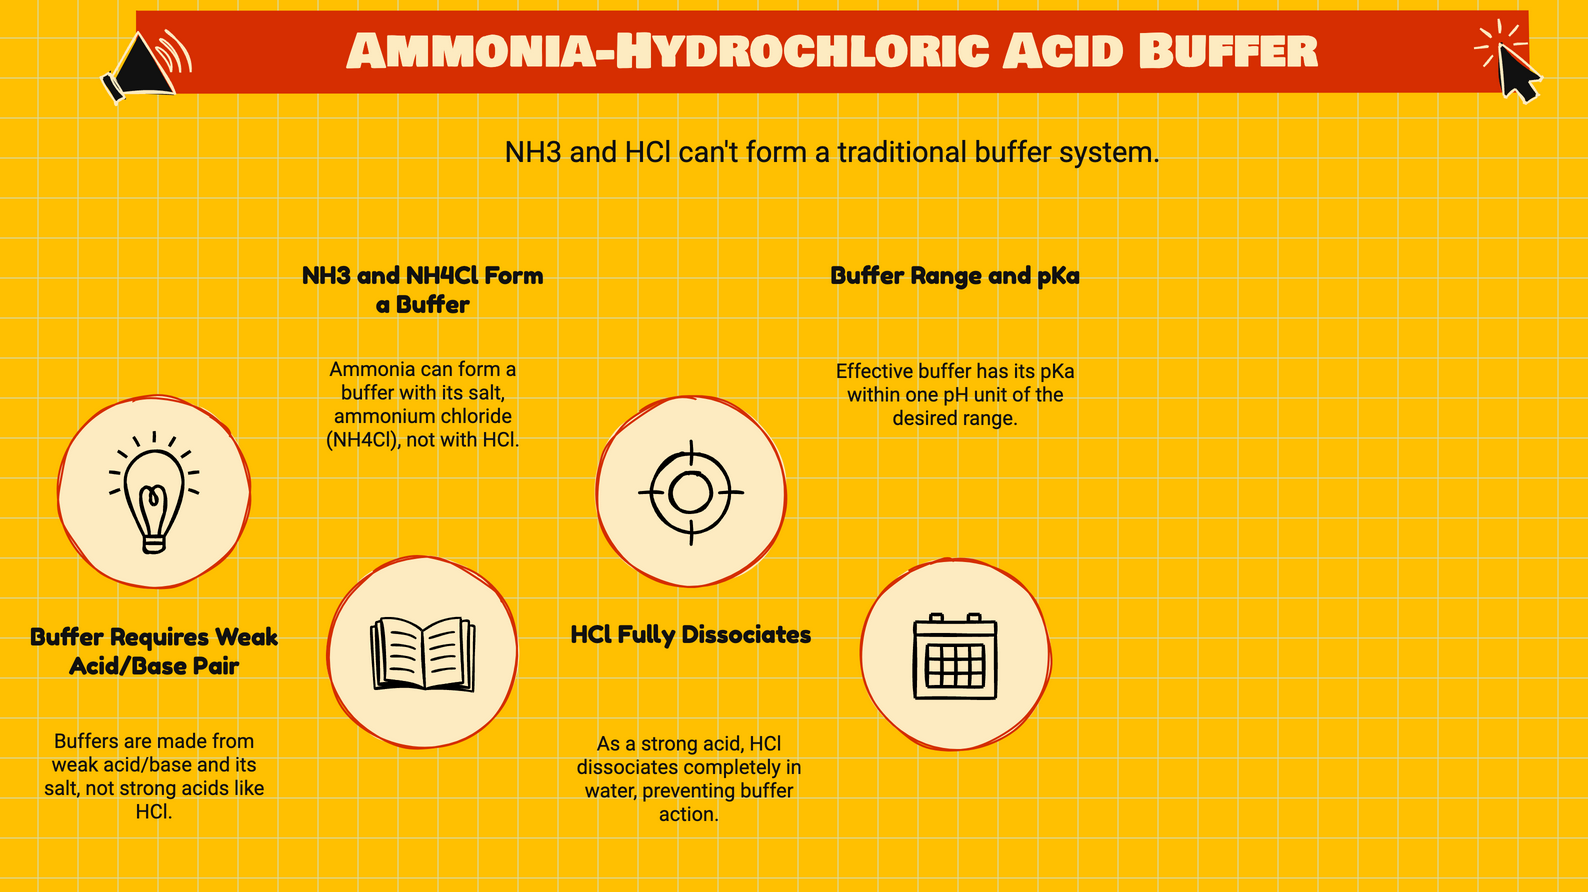 Can HCl and NH3 Make a Buffer